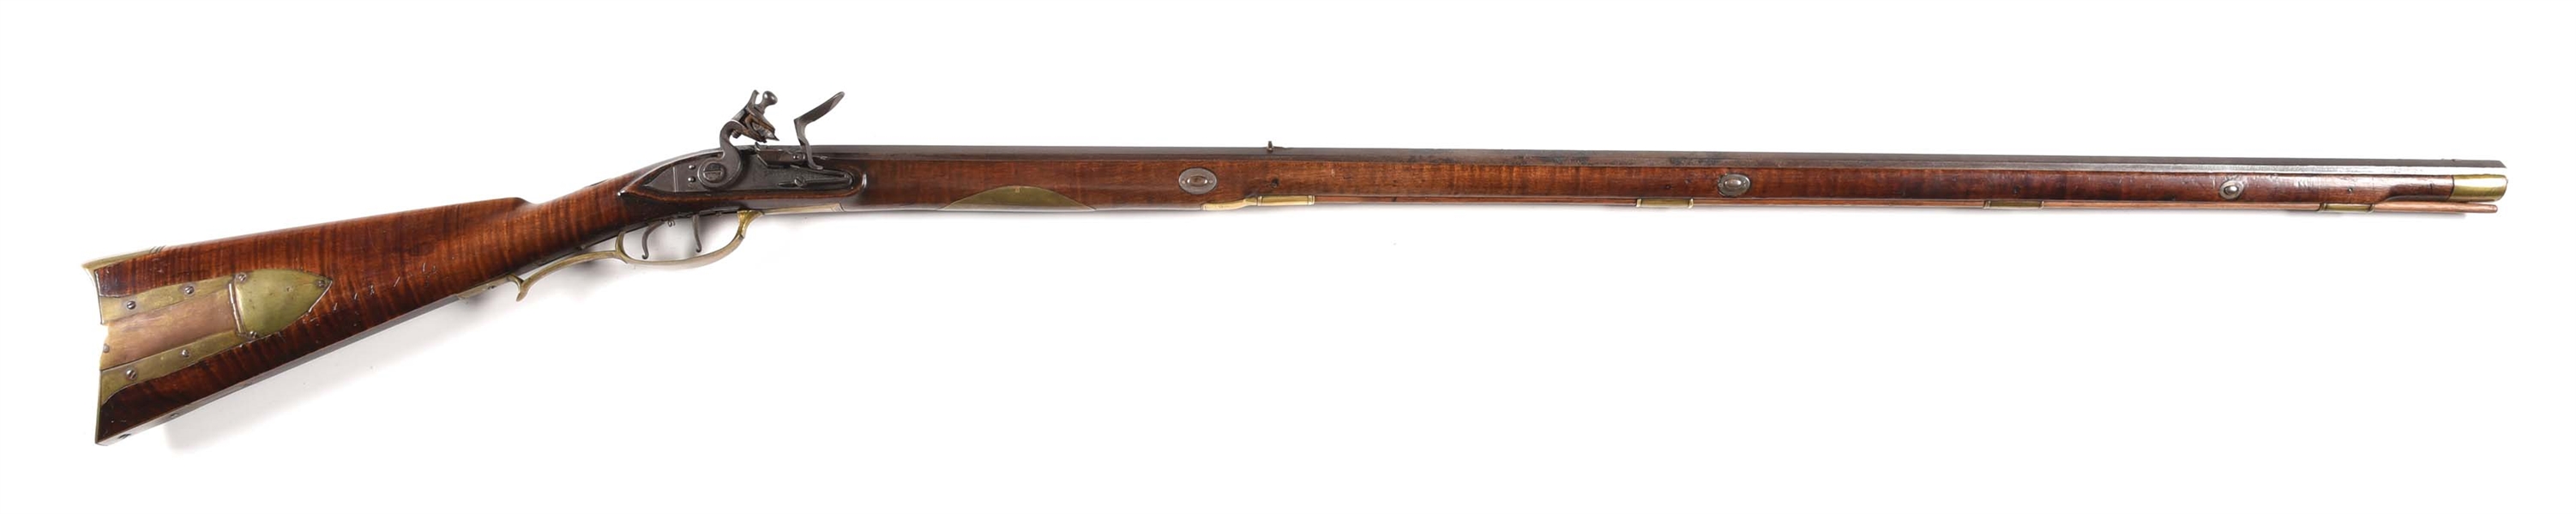 (A) UNSIGNED ATTRIBUTED VIRGINIA FLINTLOCK RIFLE.